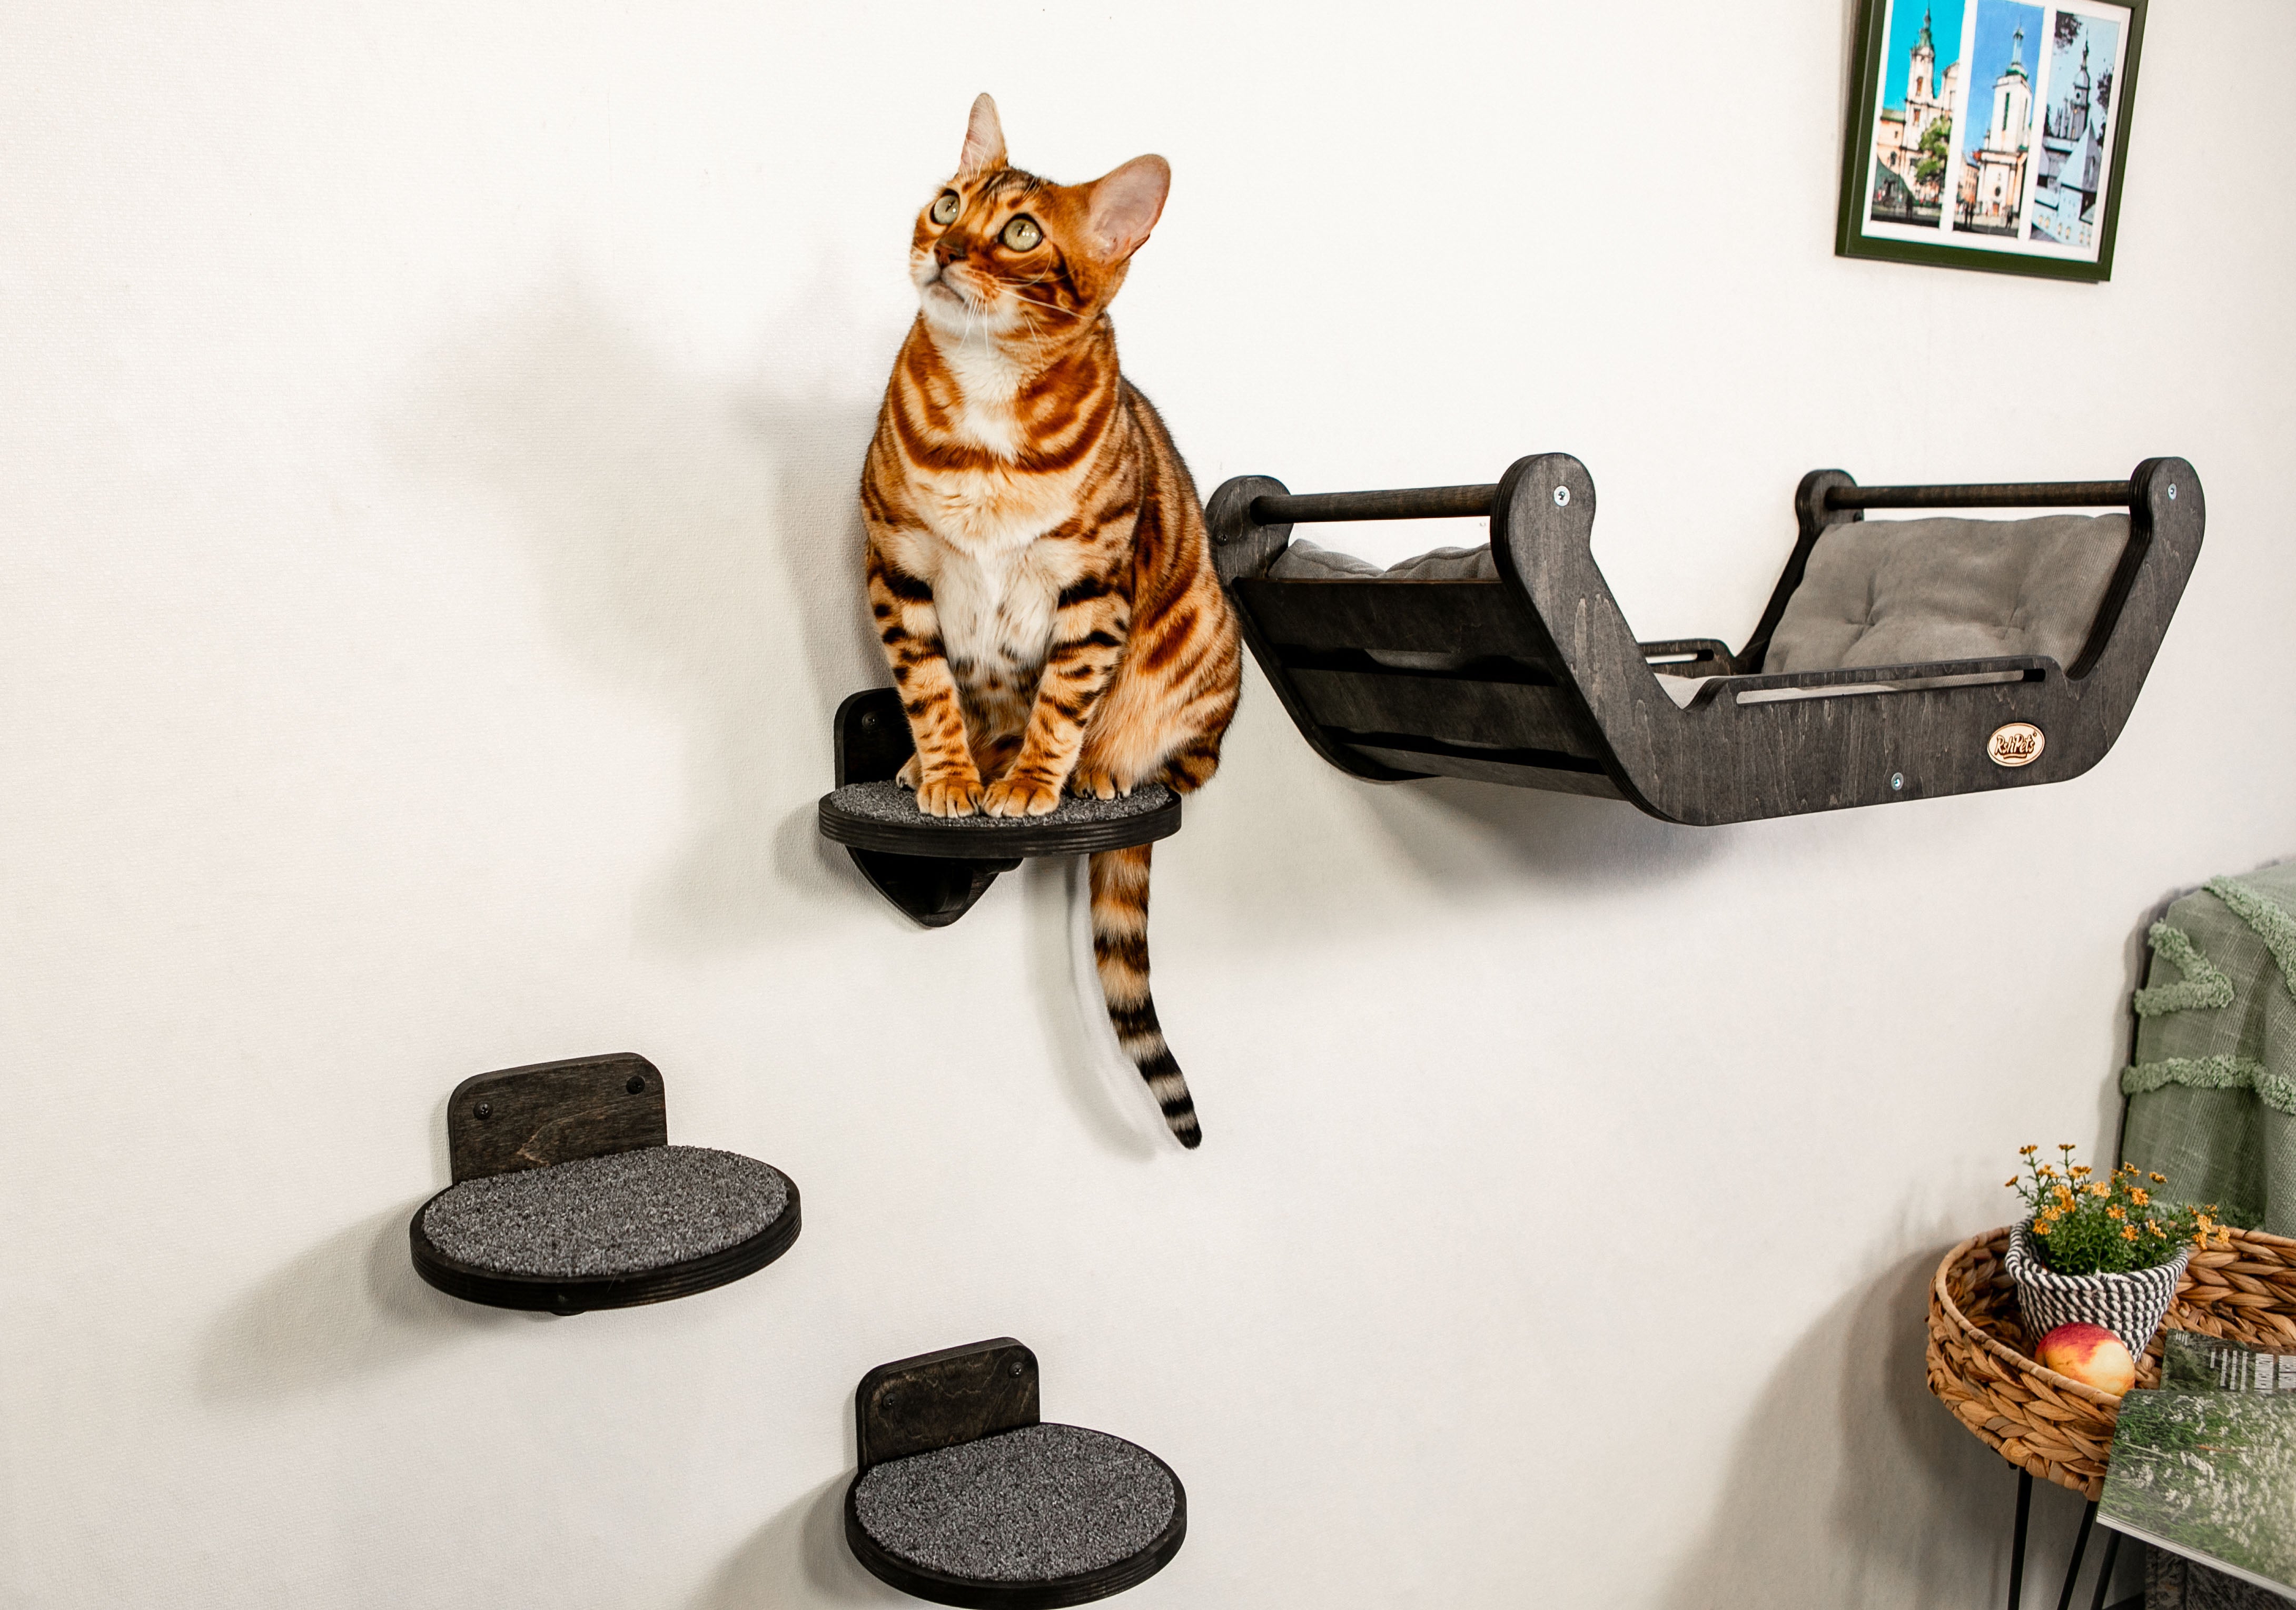 A set of wall furniture for a cat. Bed + ladder